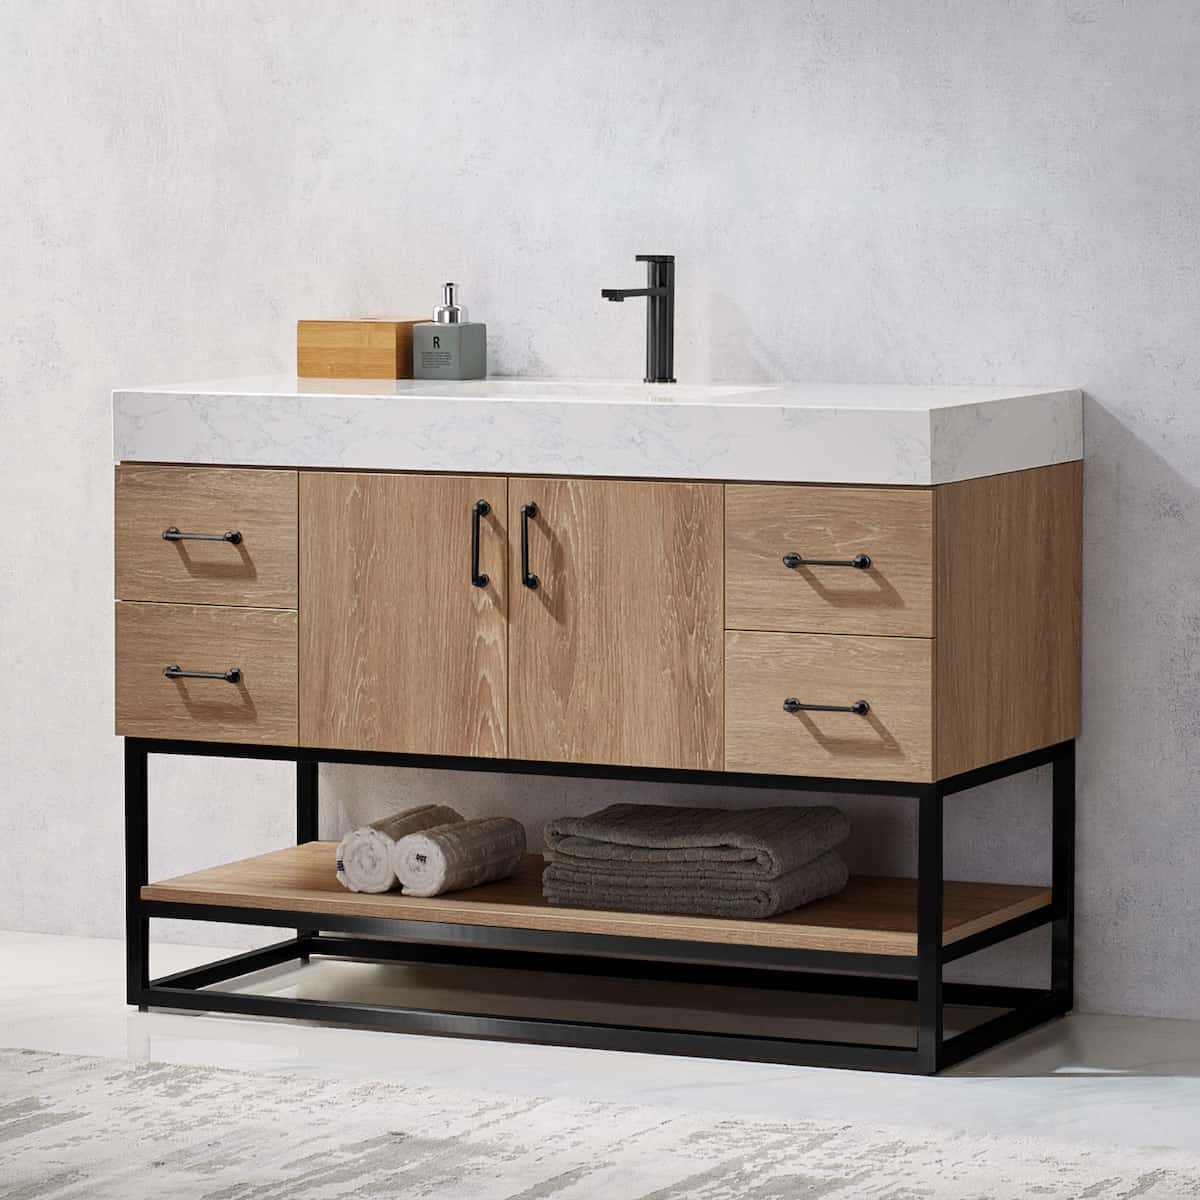 Vinnova Alistair 48 Inch Freestanding Single Vanity in North American Oak and Matte Black Frame with White Grain Stone Countertop Without Mirror Side 789048B-NO-GW-NM